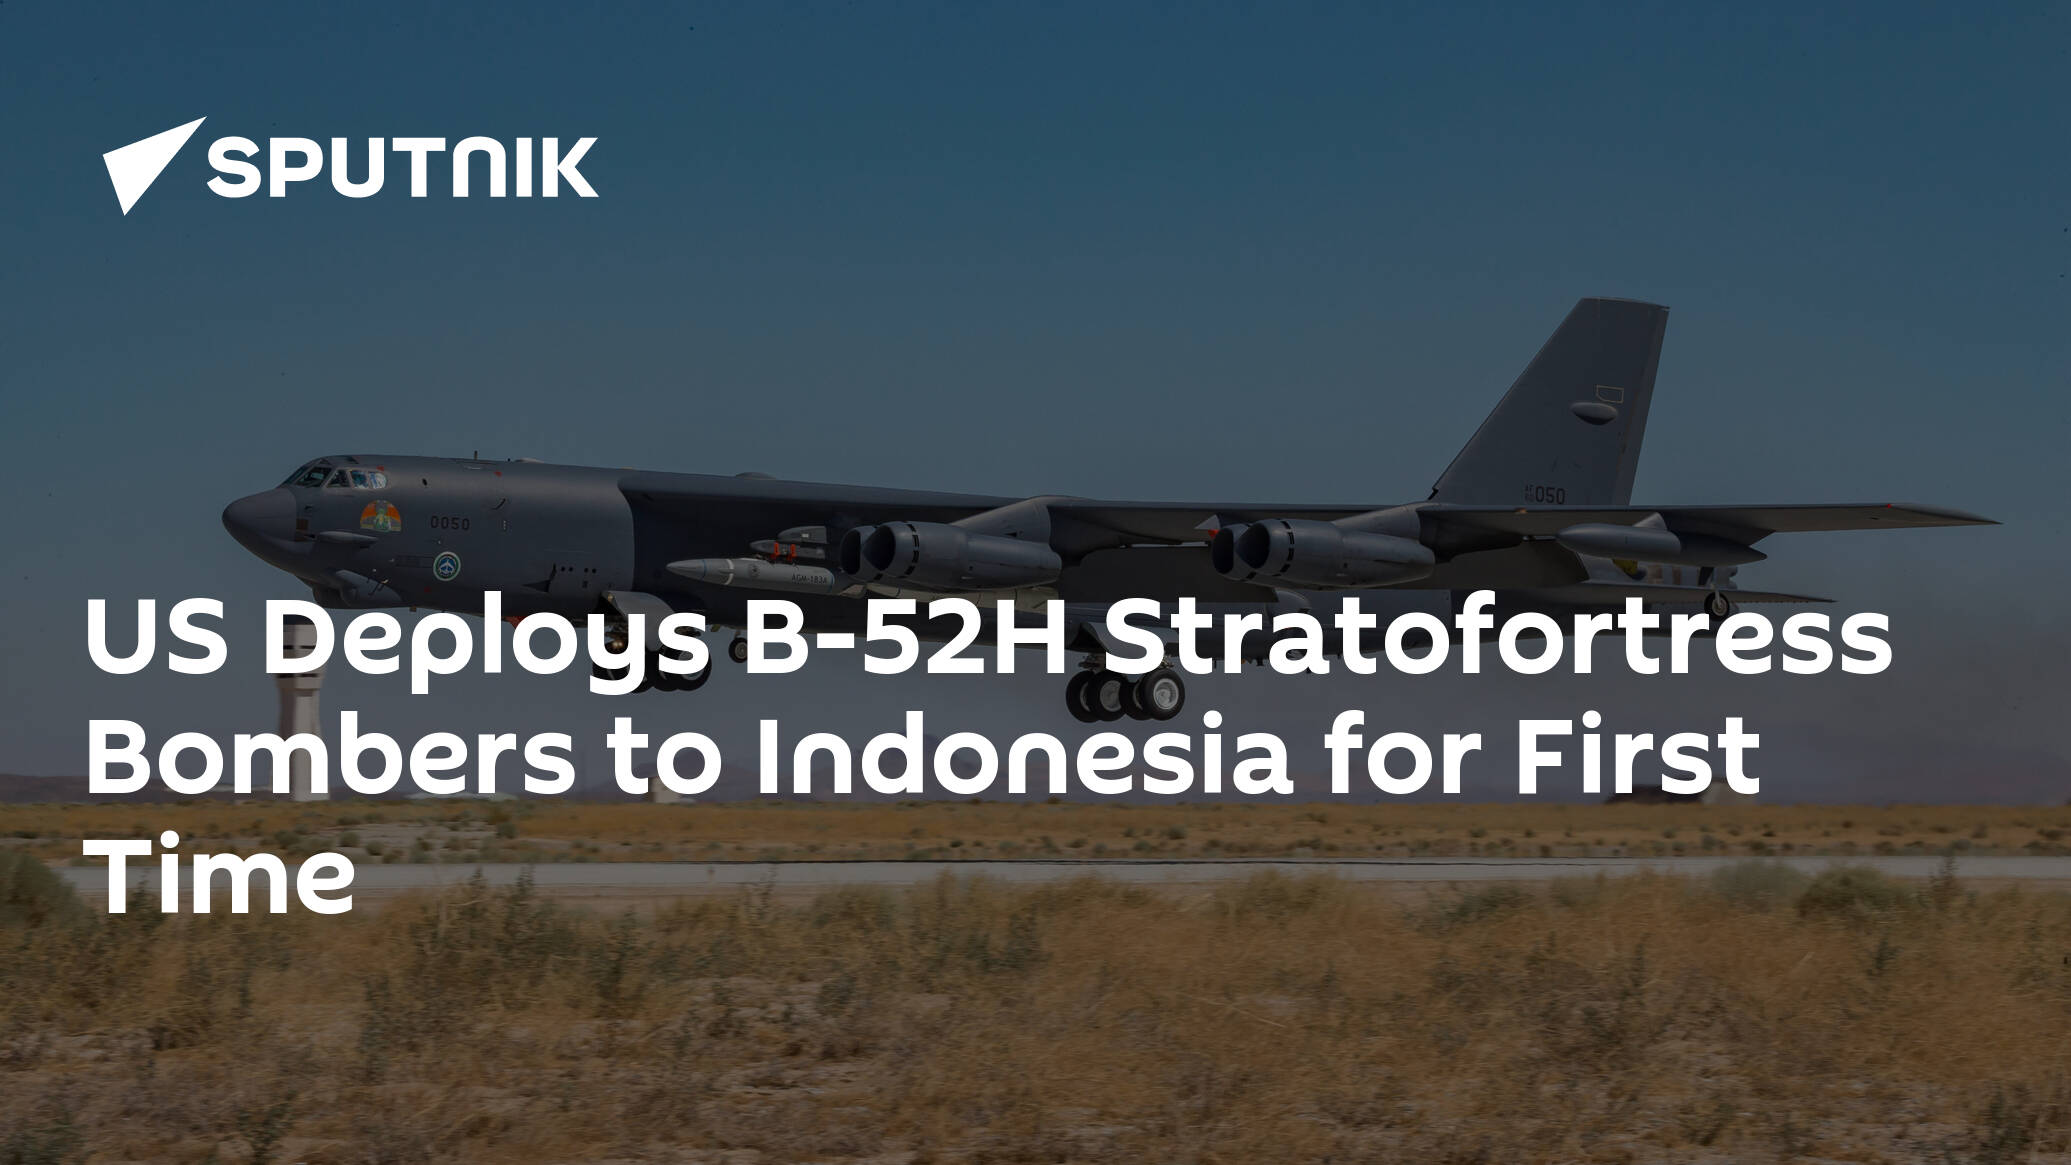 US Deploys B-52H Stratofortress Bombers to Indonesia for First Time